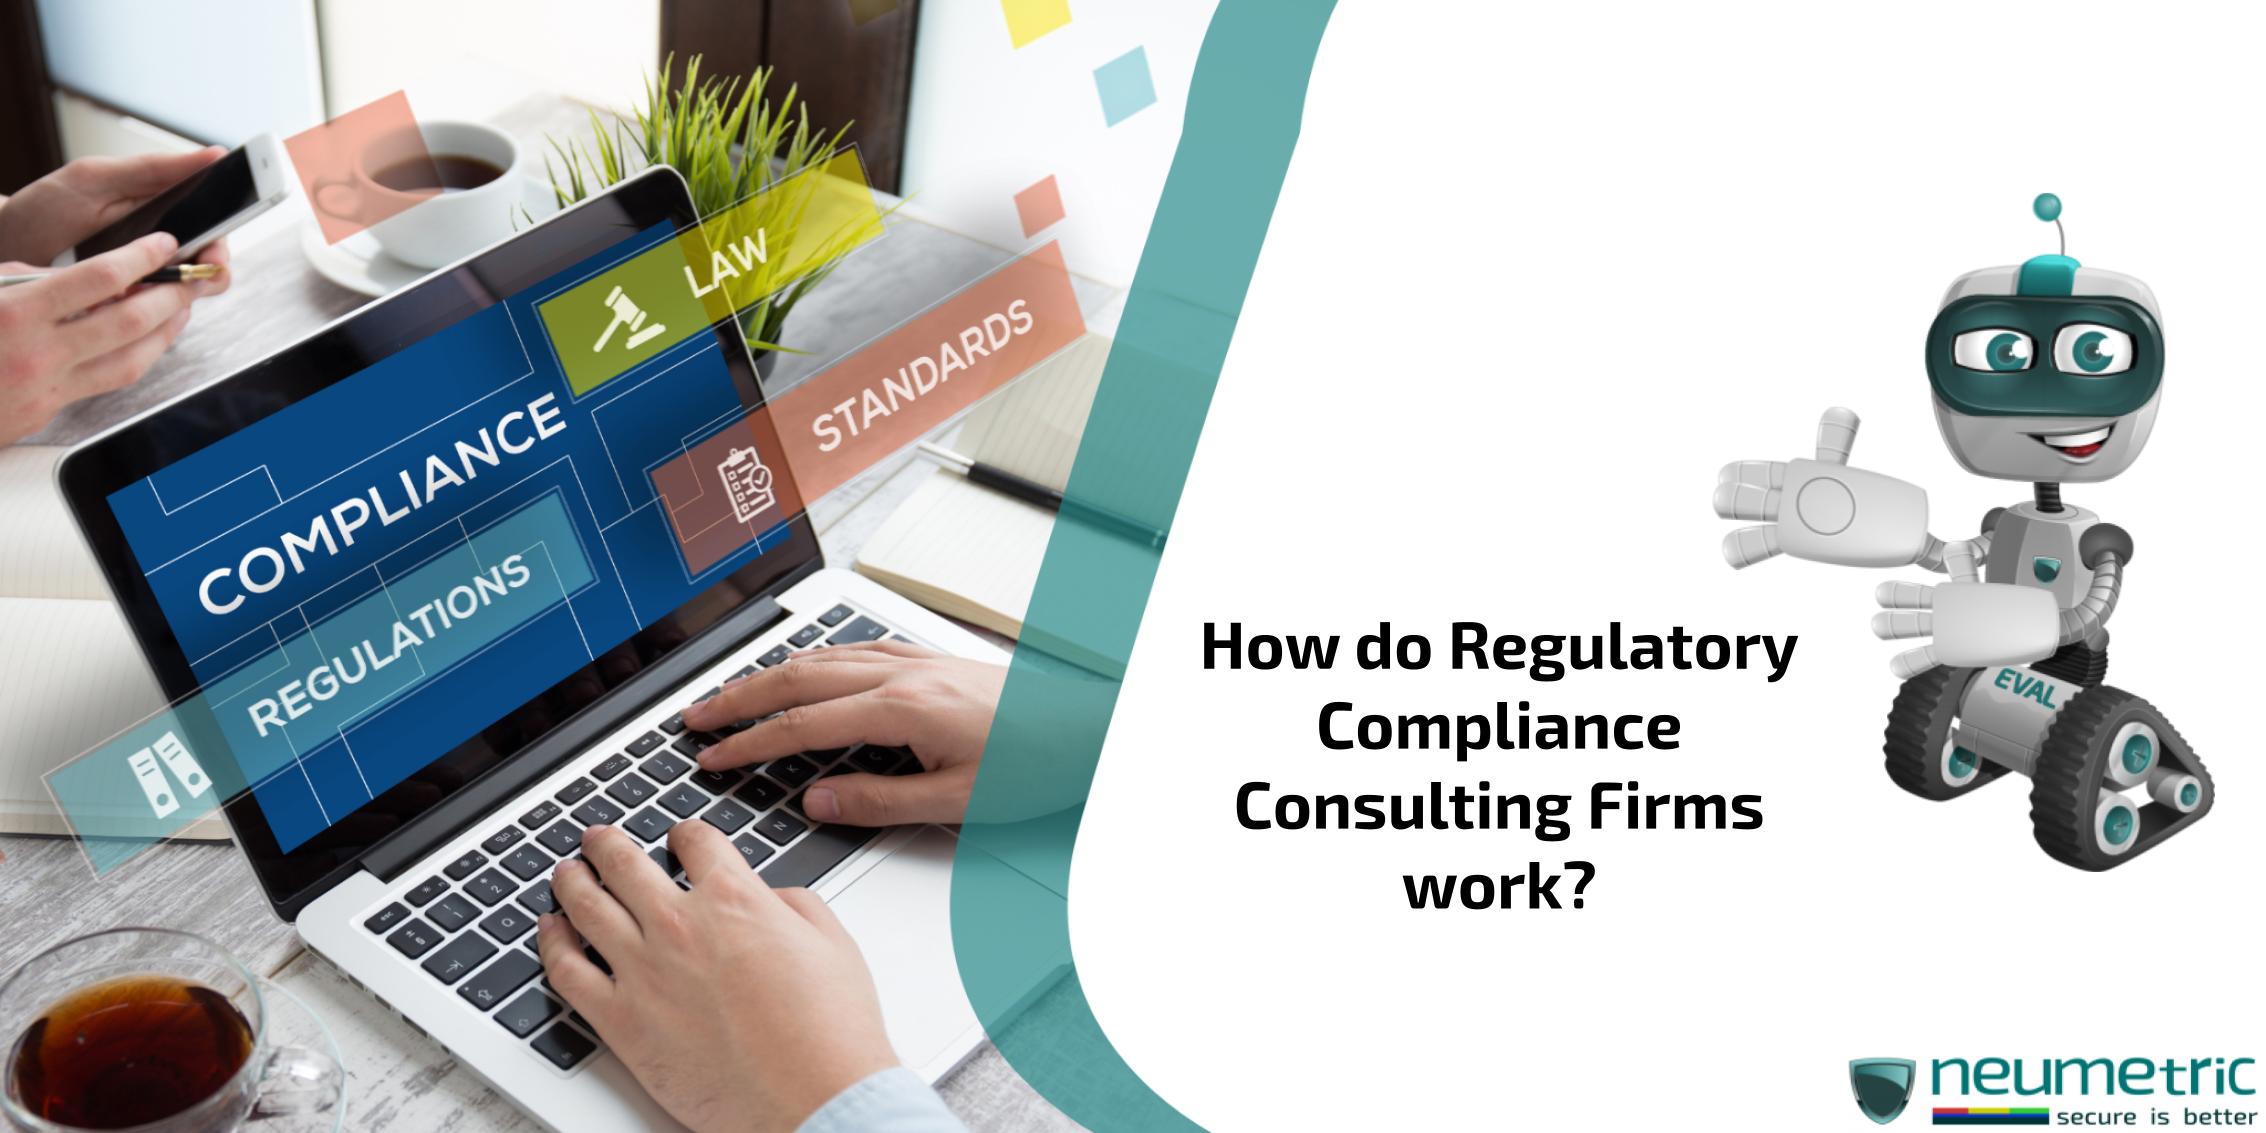 Regulatory compliance consulting firms